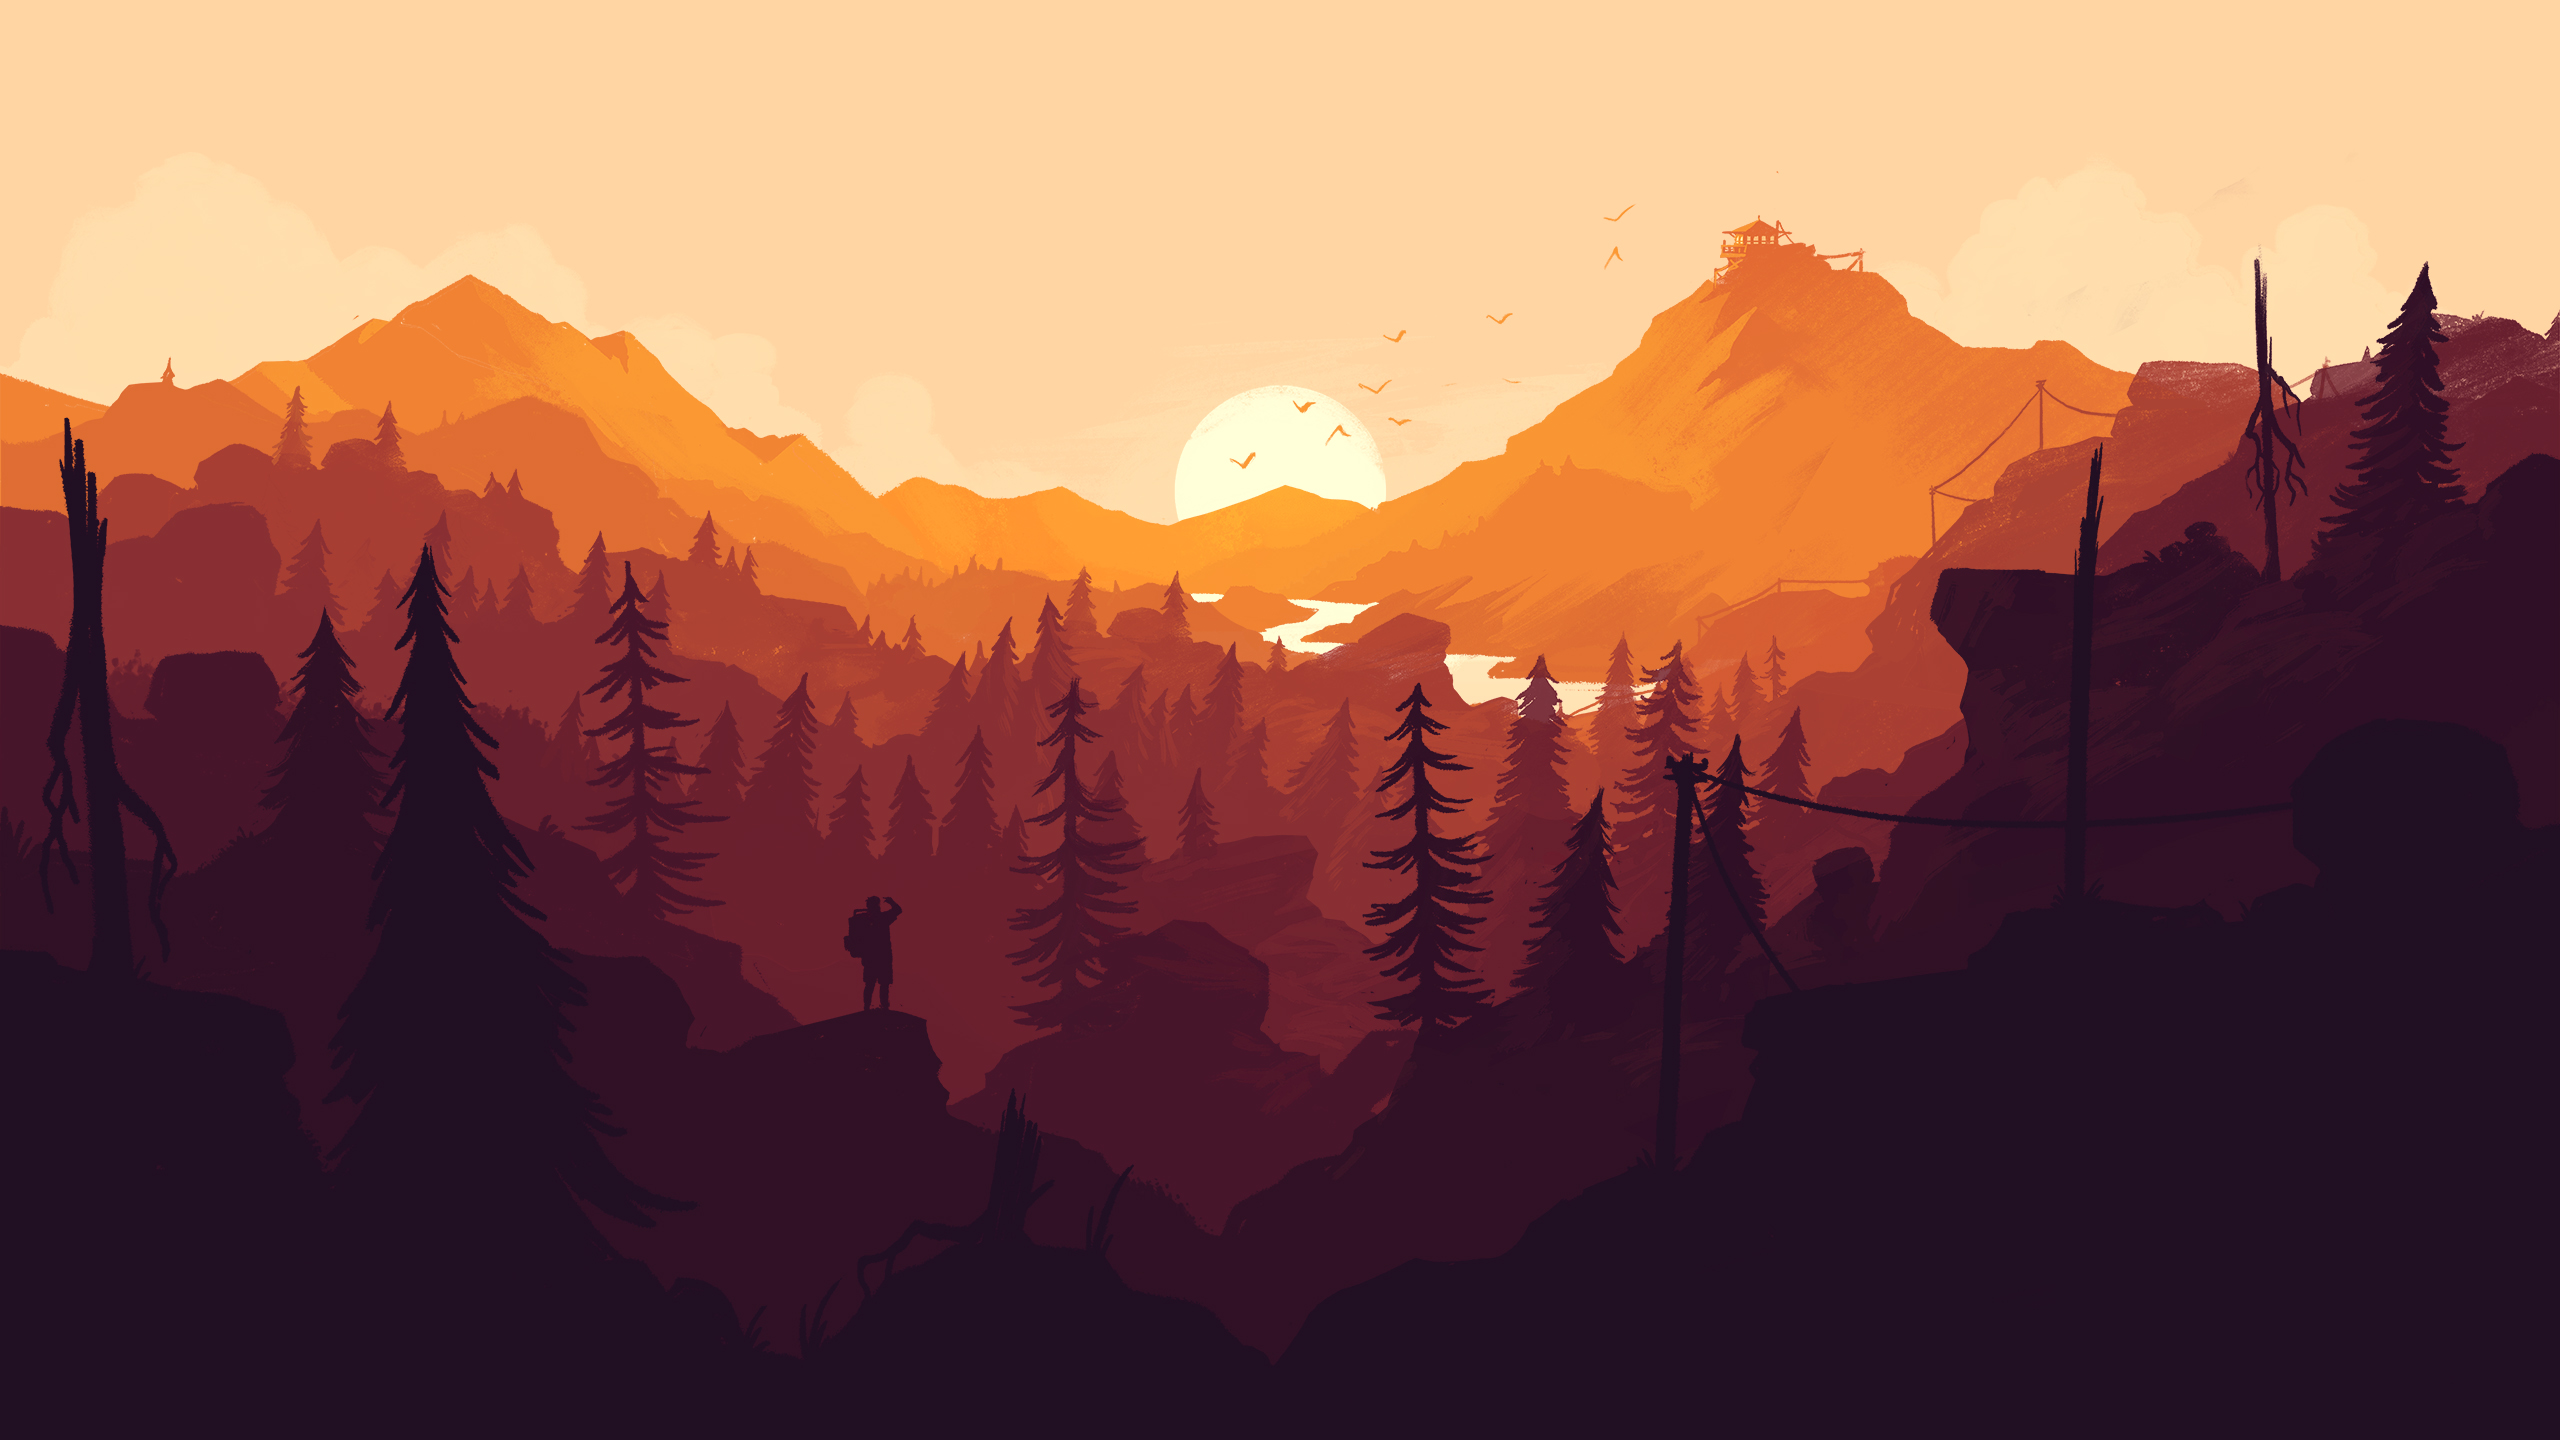 General 2560x1440 Firewatch forest mountains video games video game landscape PC gaming video game art nature sunlight